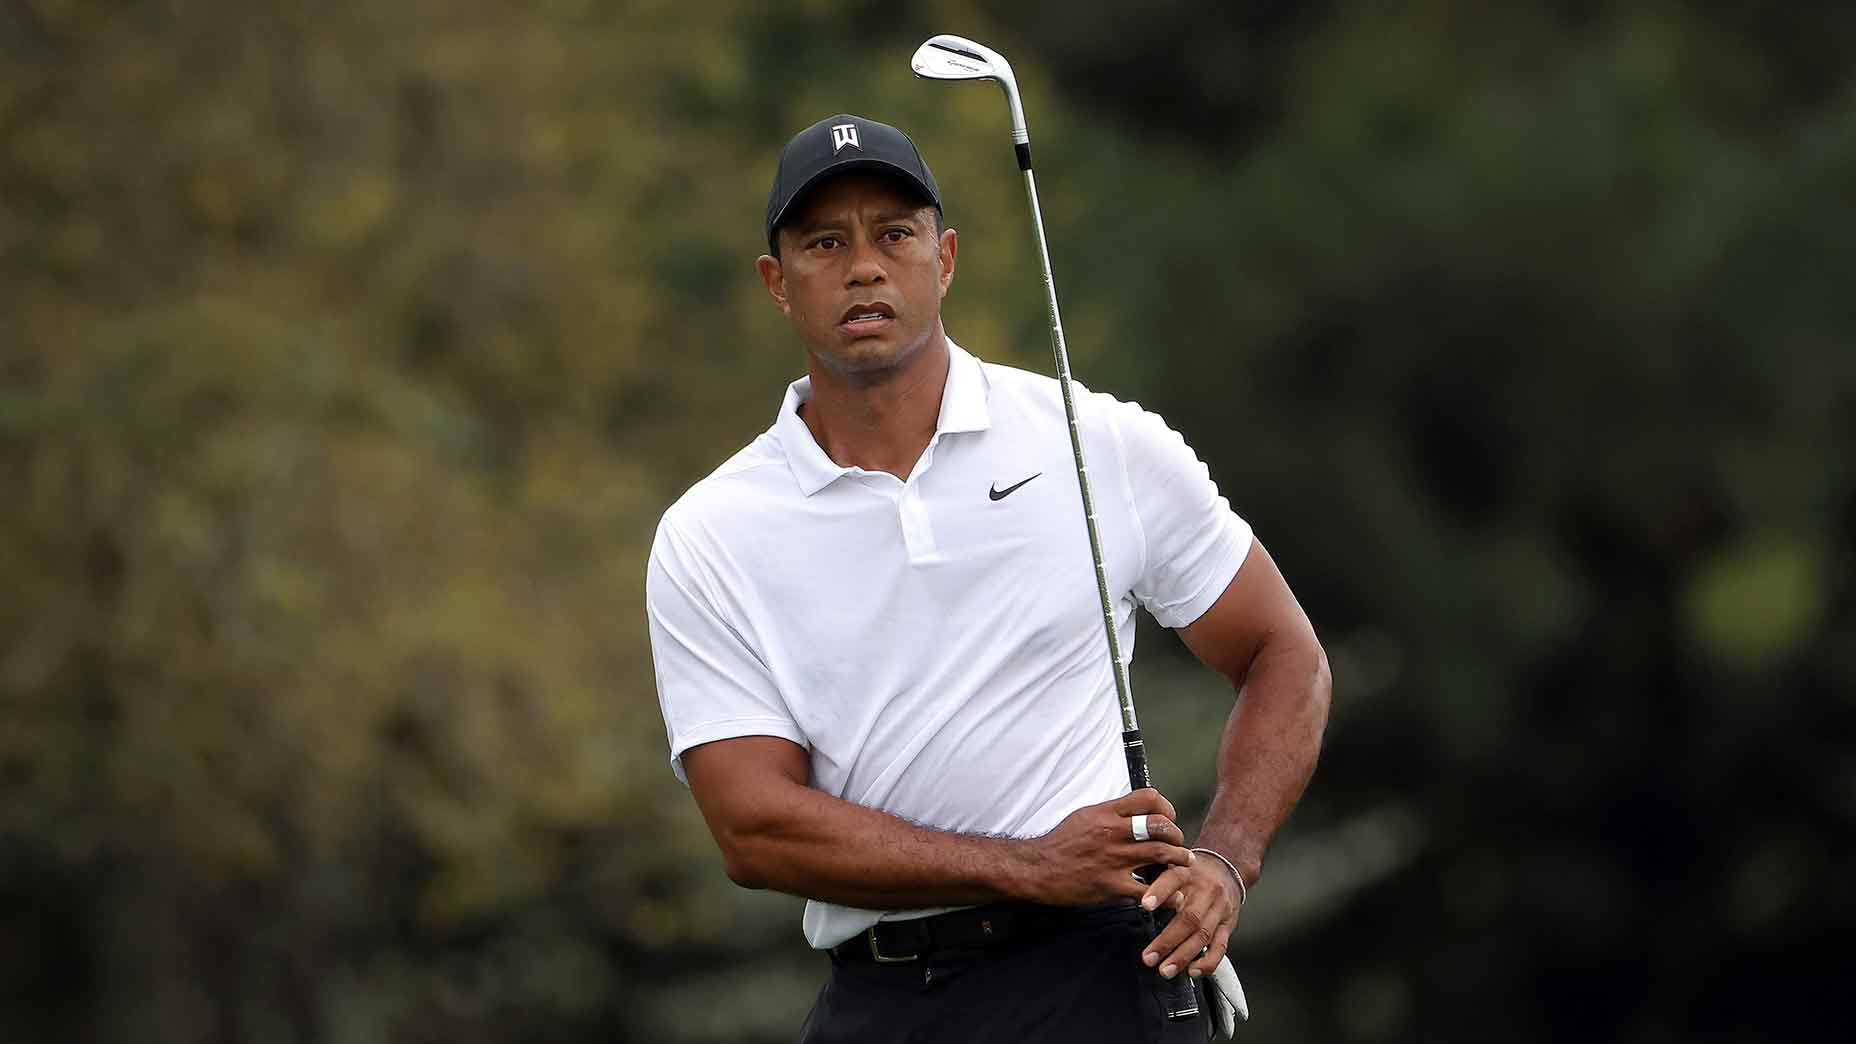 Tiger Woods drops out of U.S. Open, hopes to play Open Championship